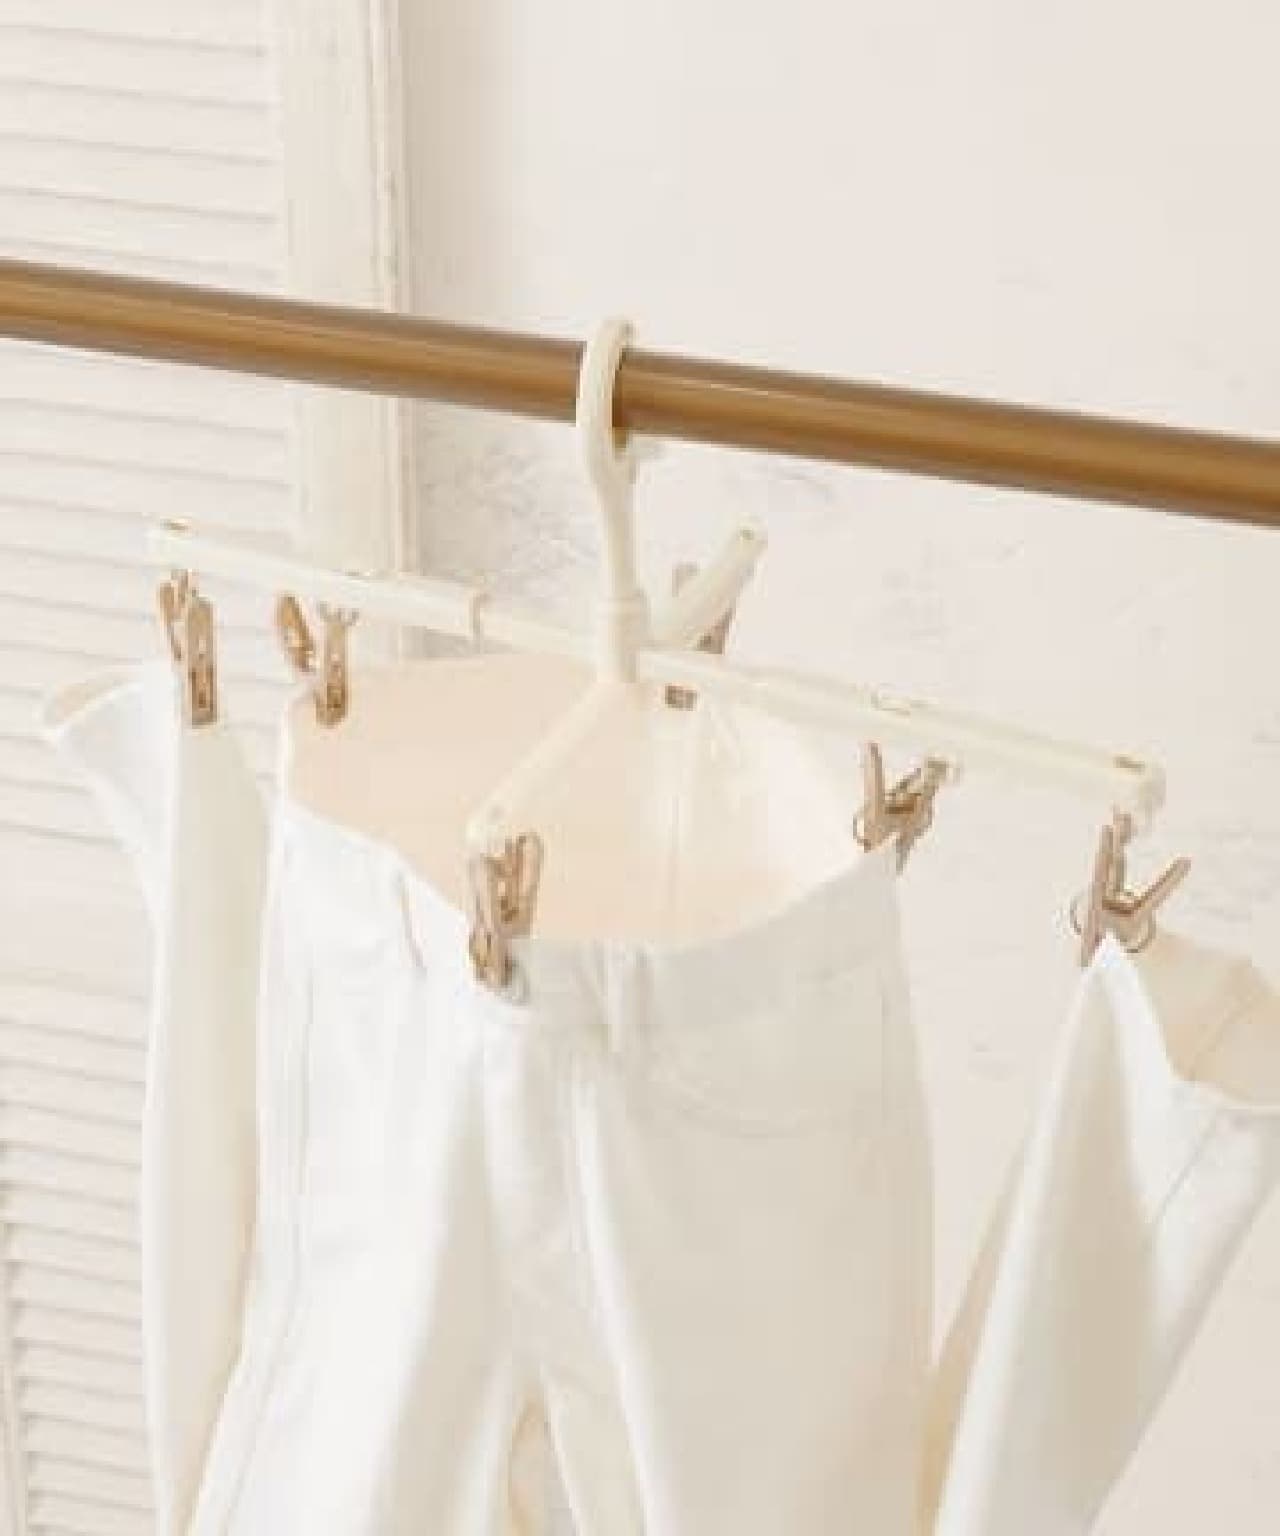 Elastic hanger for bottoms that allows clothes to dry easily